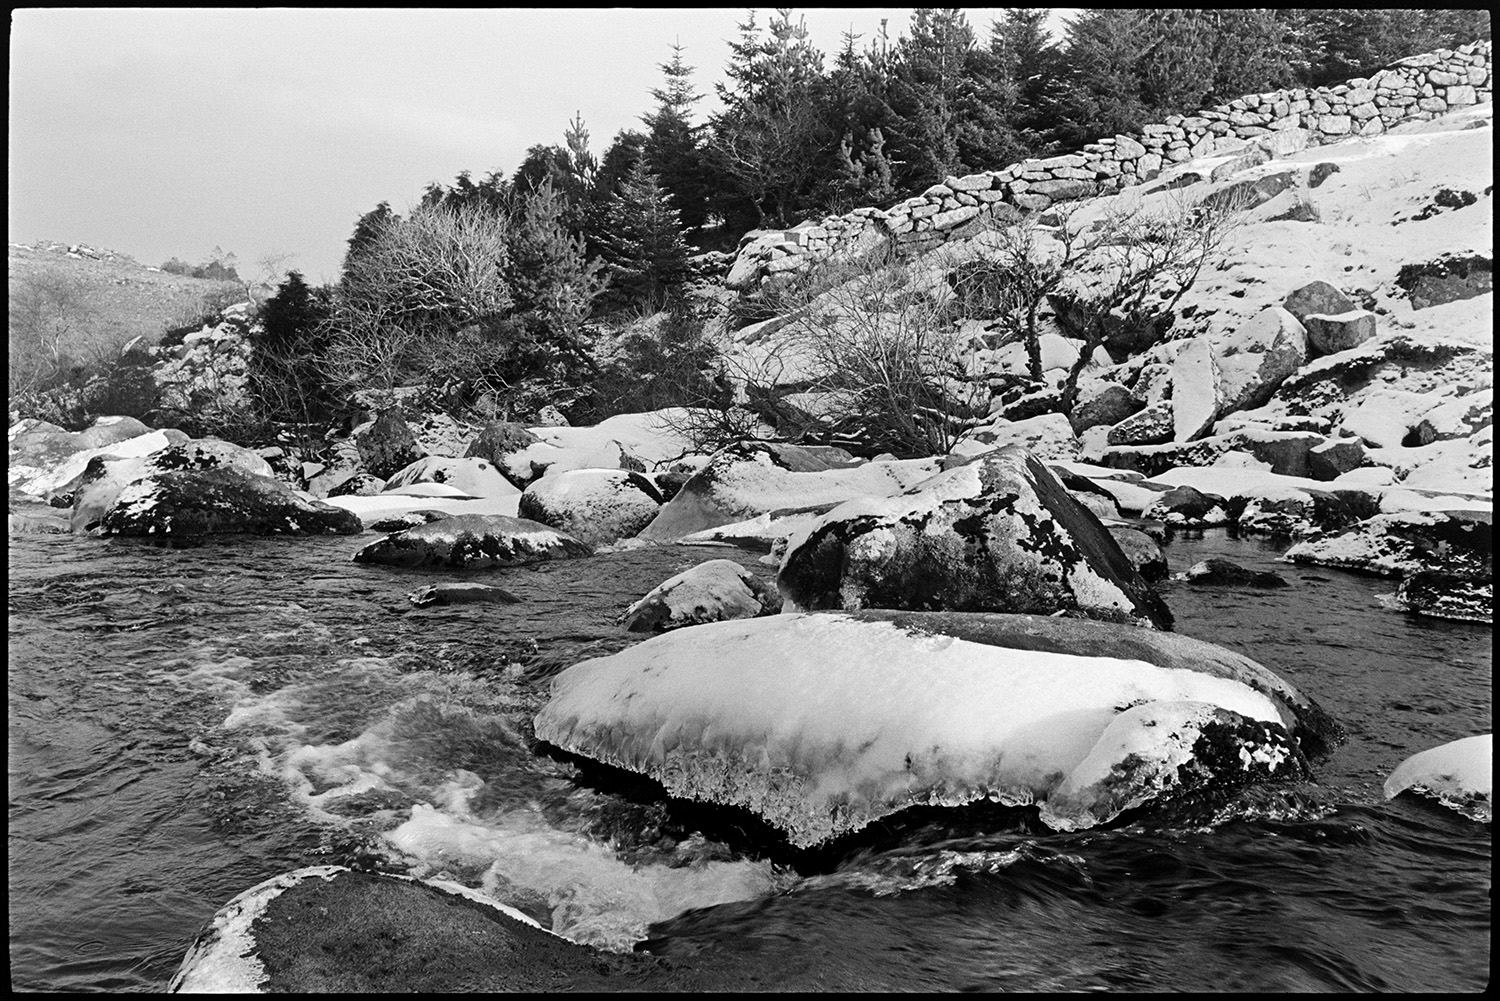 Snow, rocky river with ice and distant pine trees. 
[A river on Dartmoor. Rocks on the bank of the river are covered with snow and ice. A row of pine trees and  dry stone wall run down the hill to the river.]